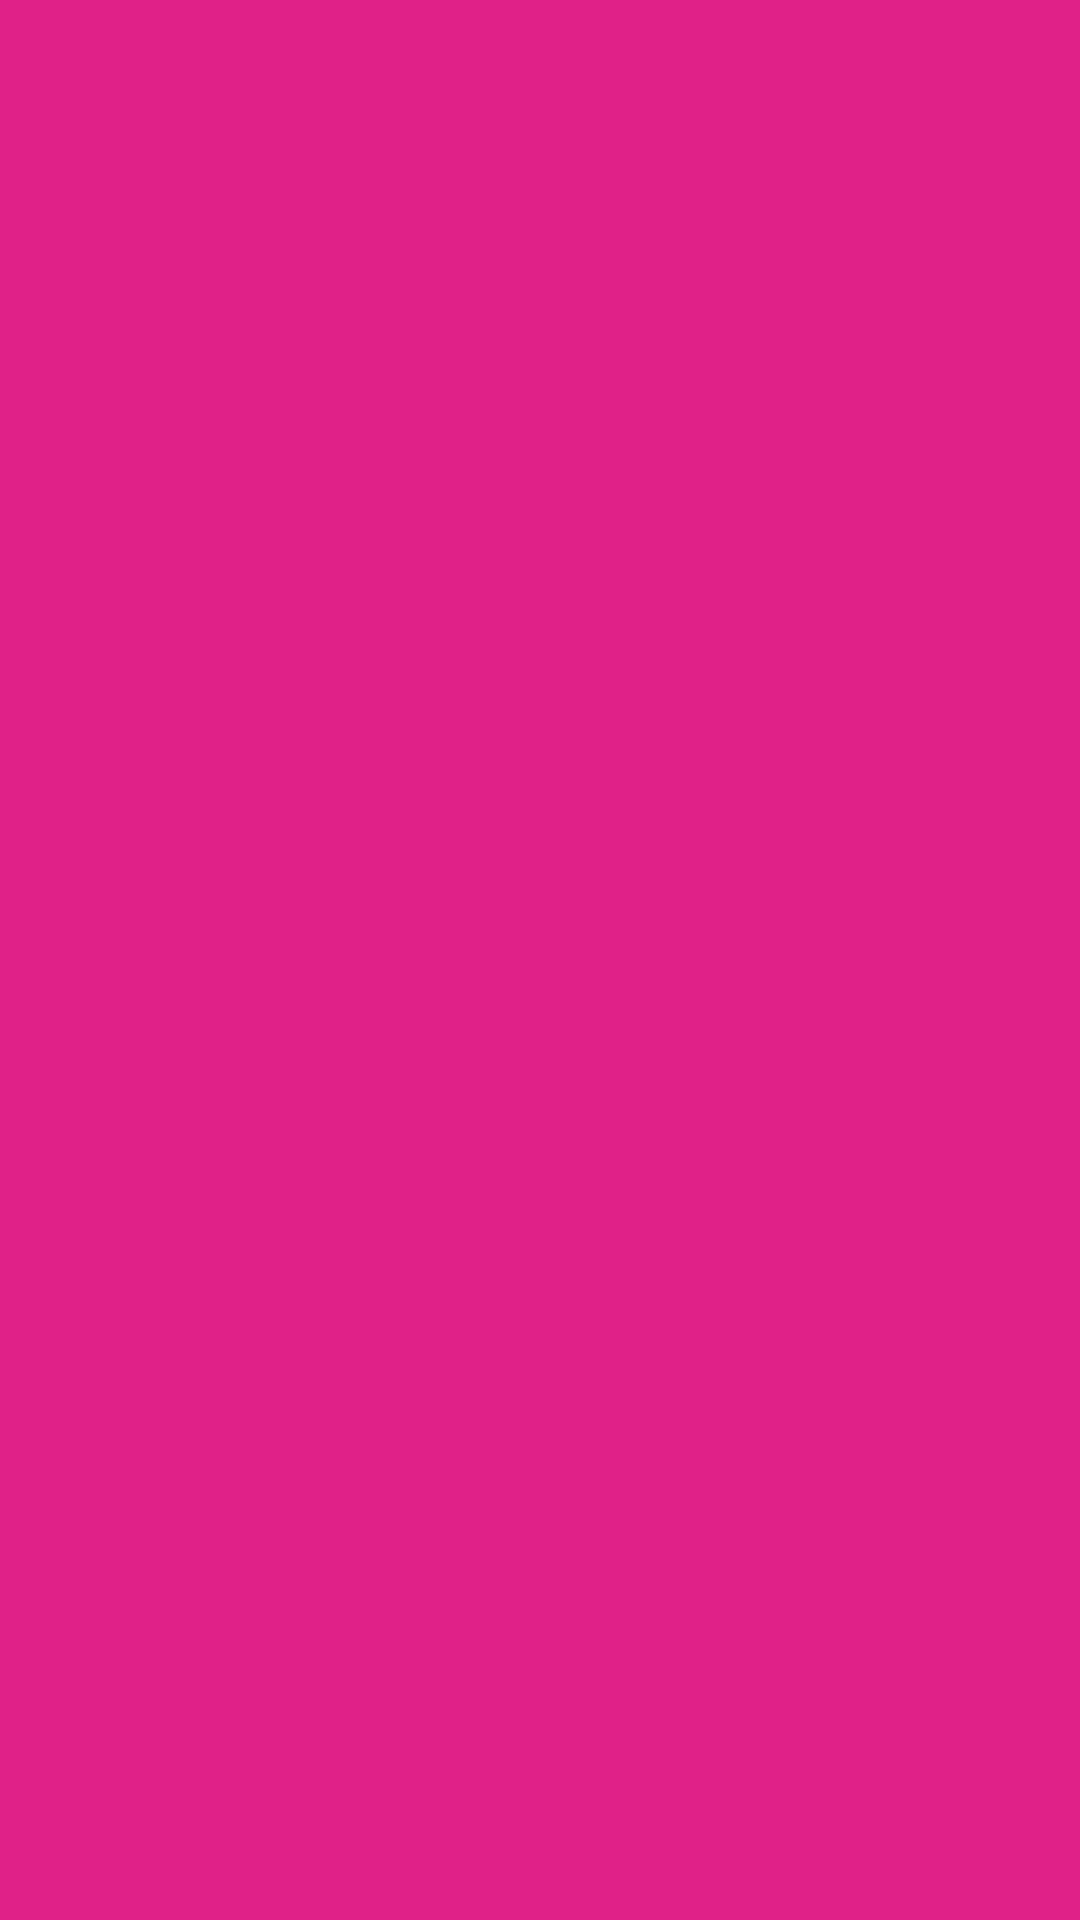 Colorful and vibrant pink solid background